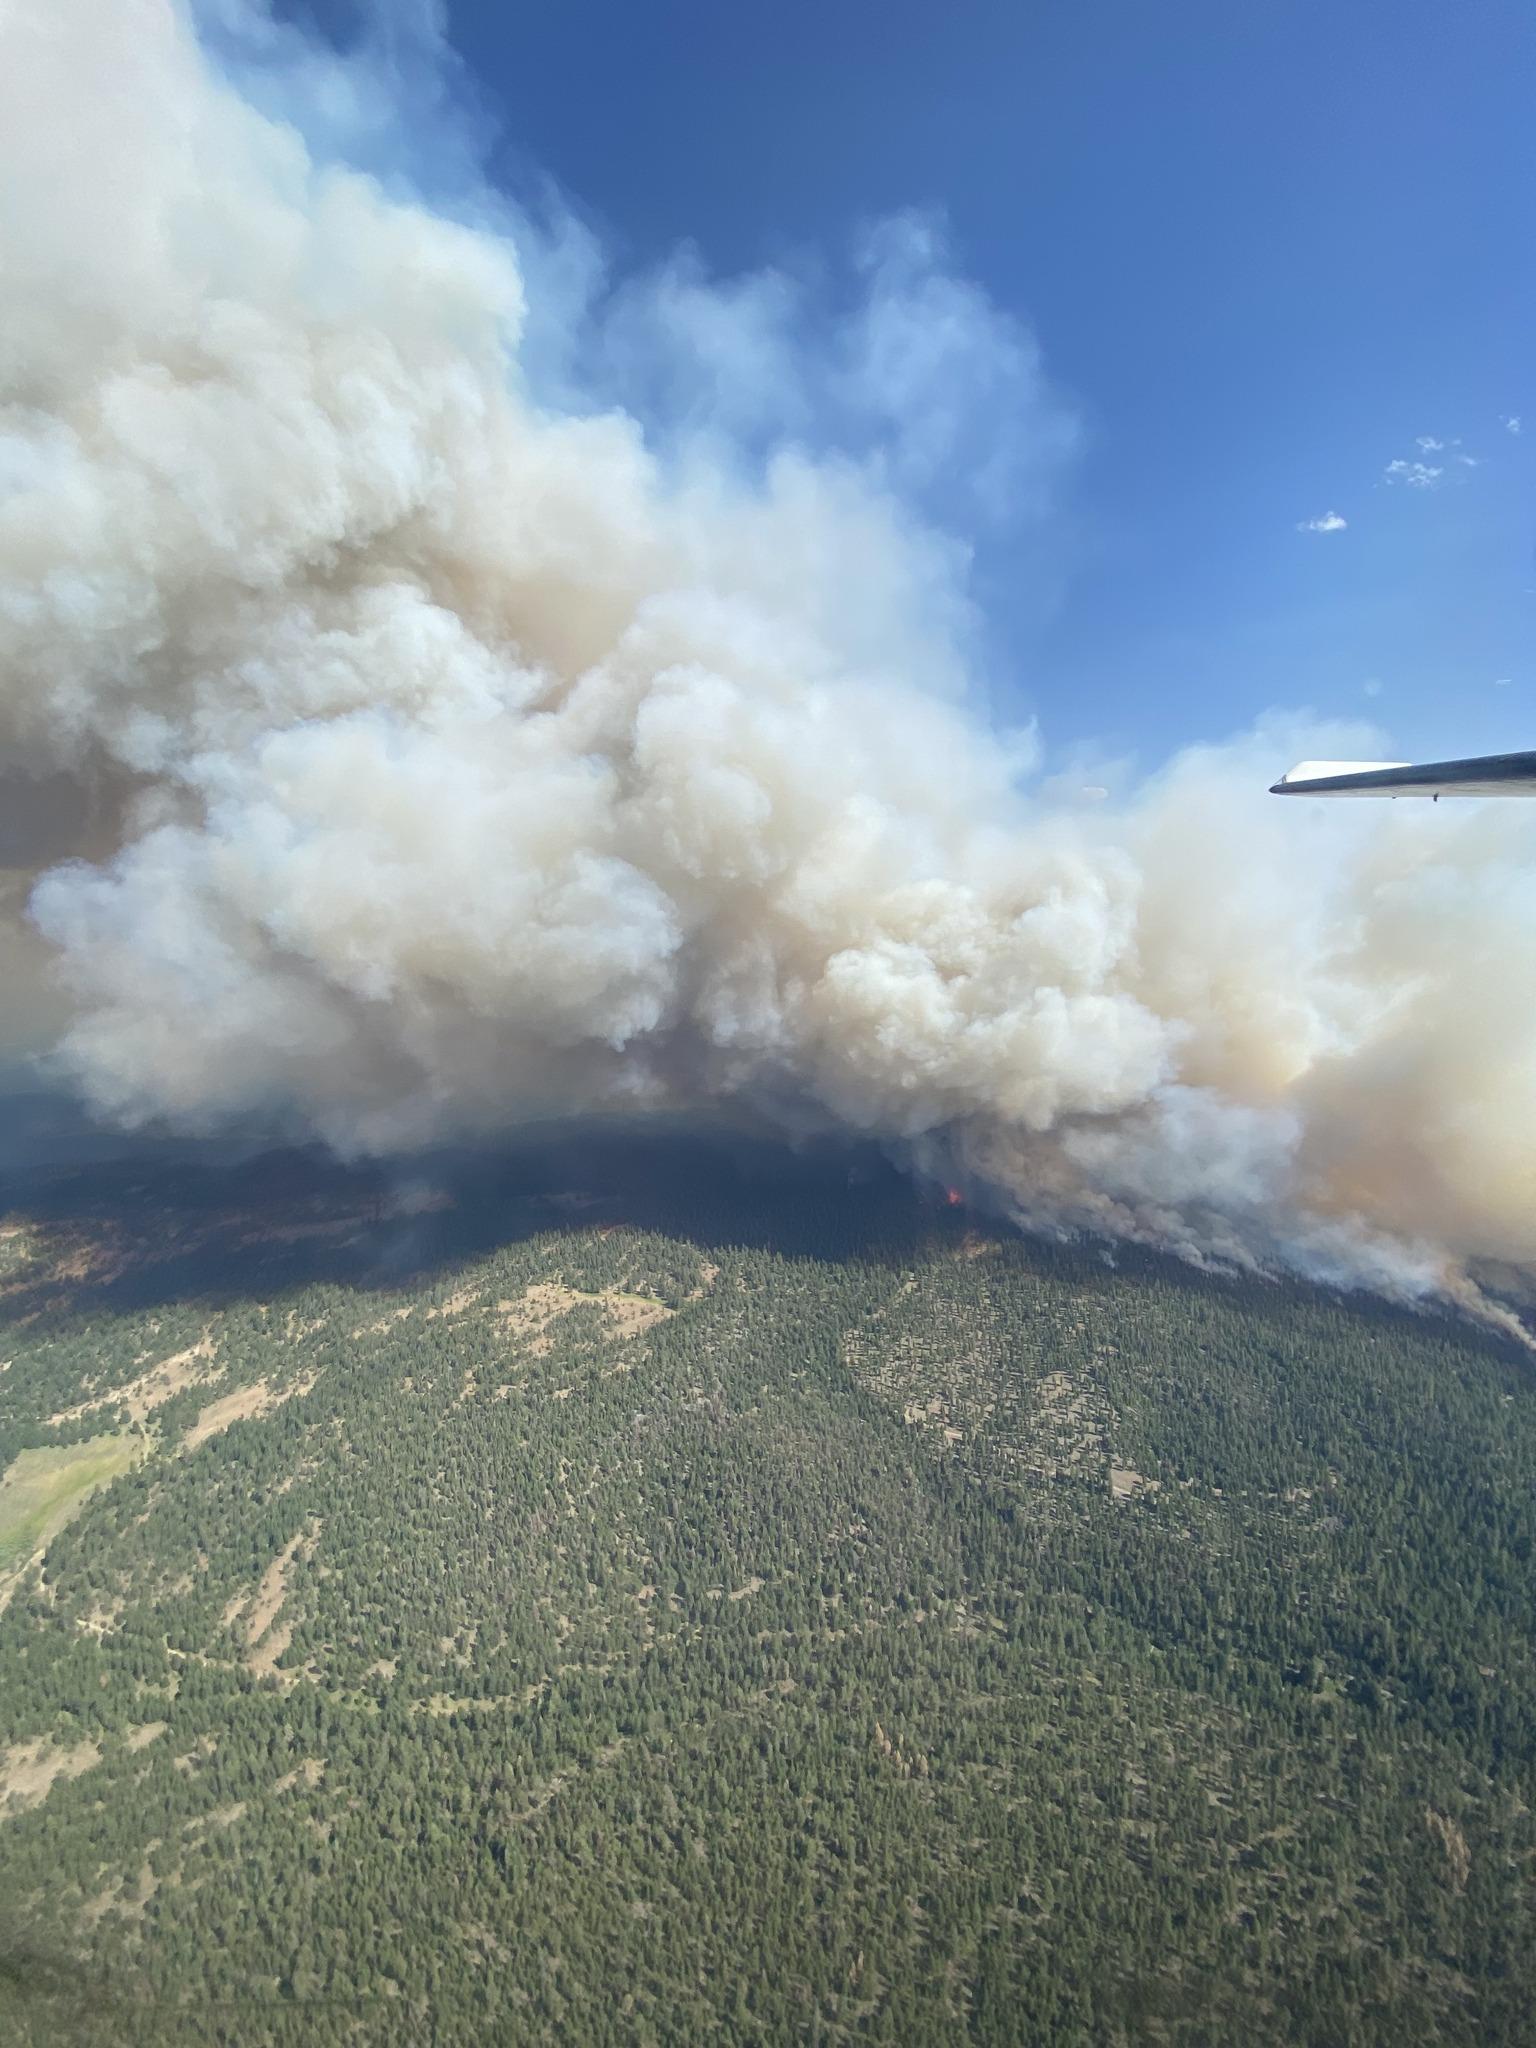 Falls Fire as seen from the air